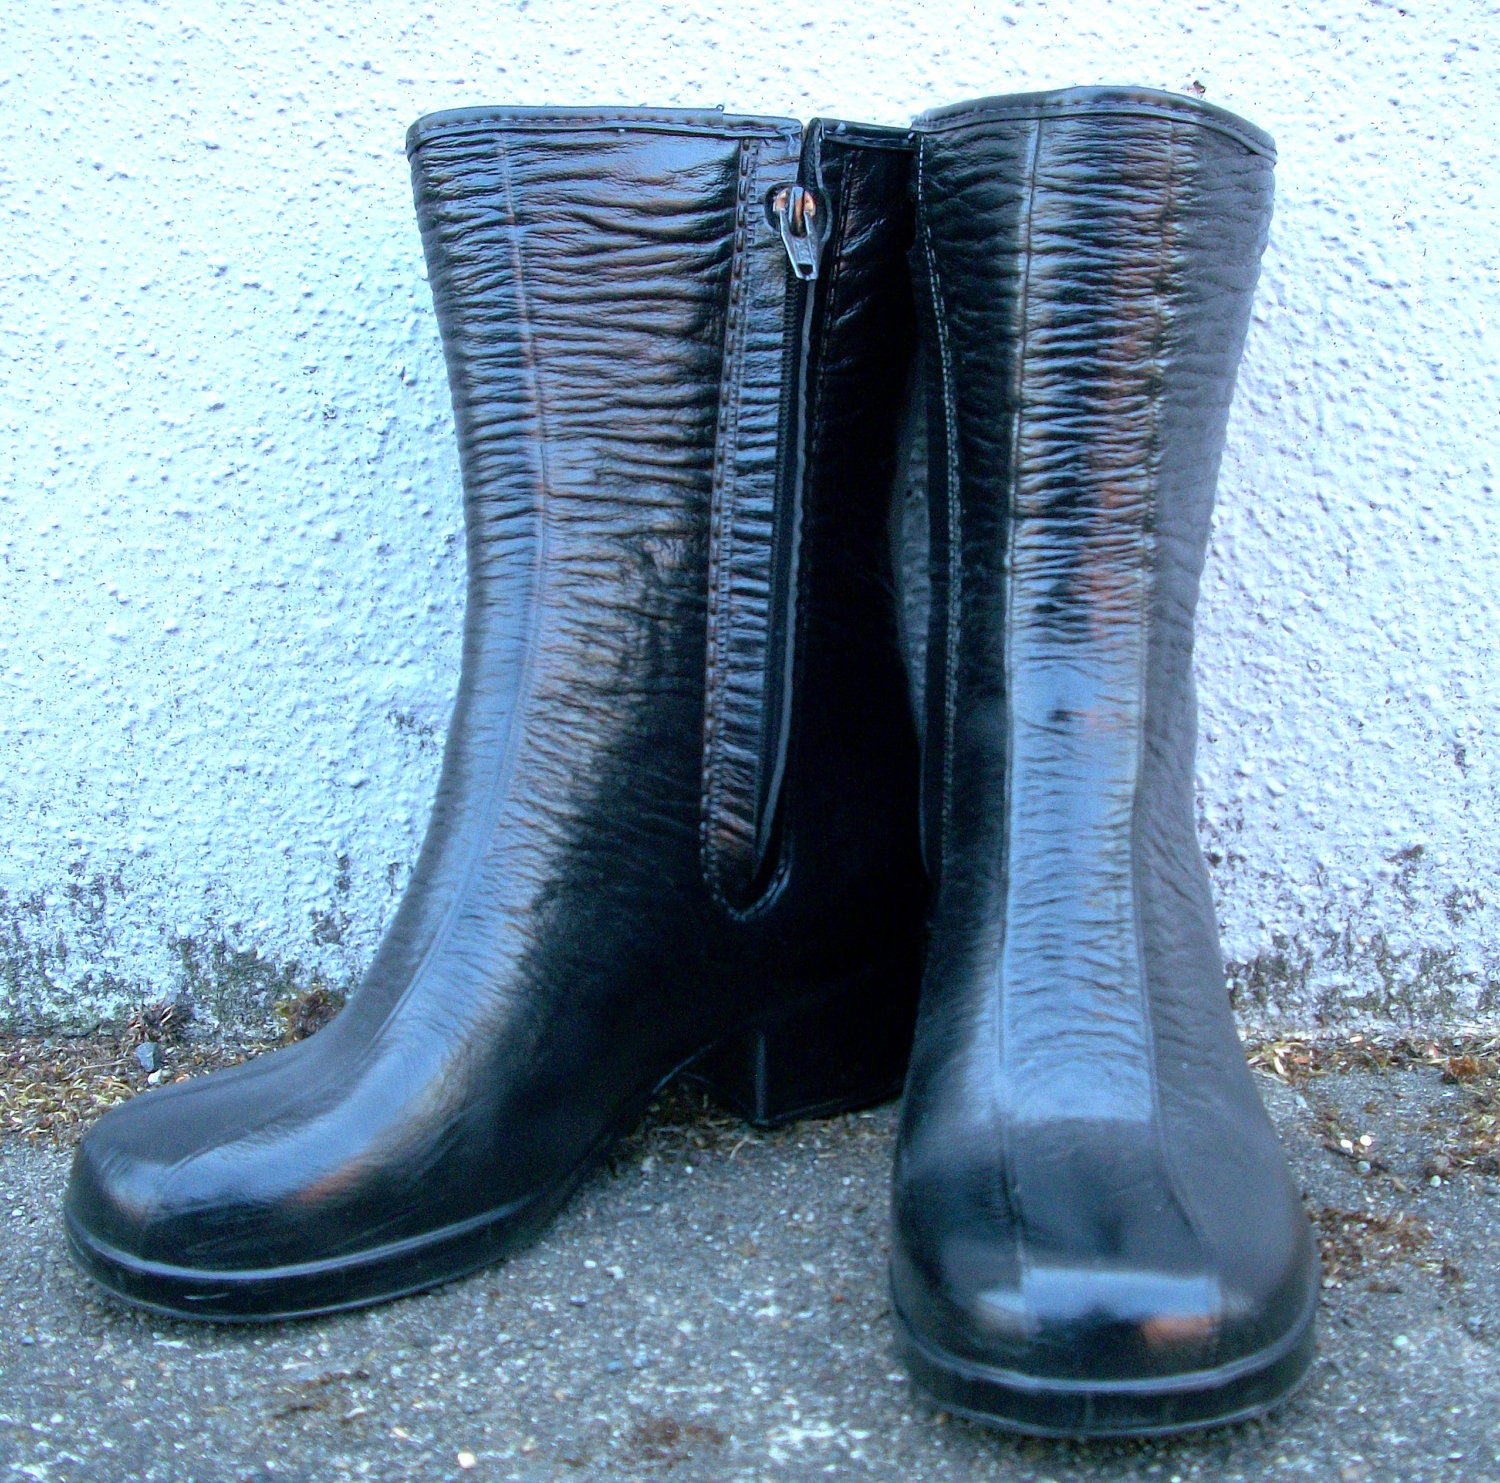 Singing in the Rain Fleece Lined Rubber Boots 8 - evileyevintage